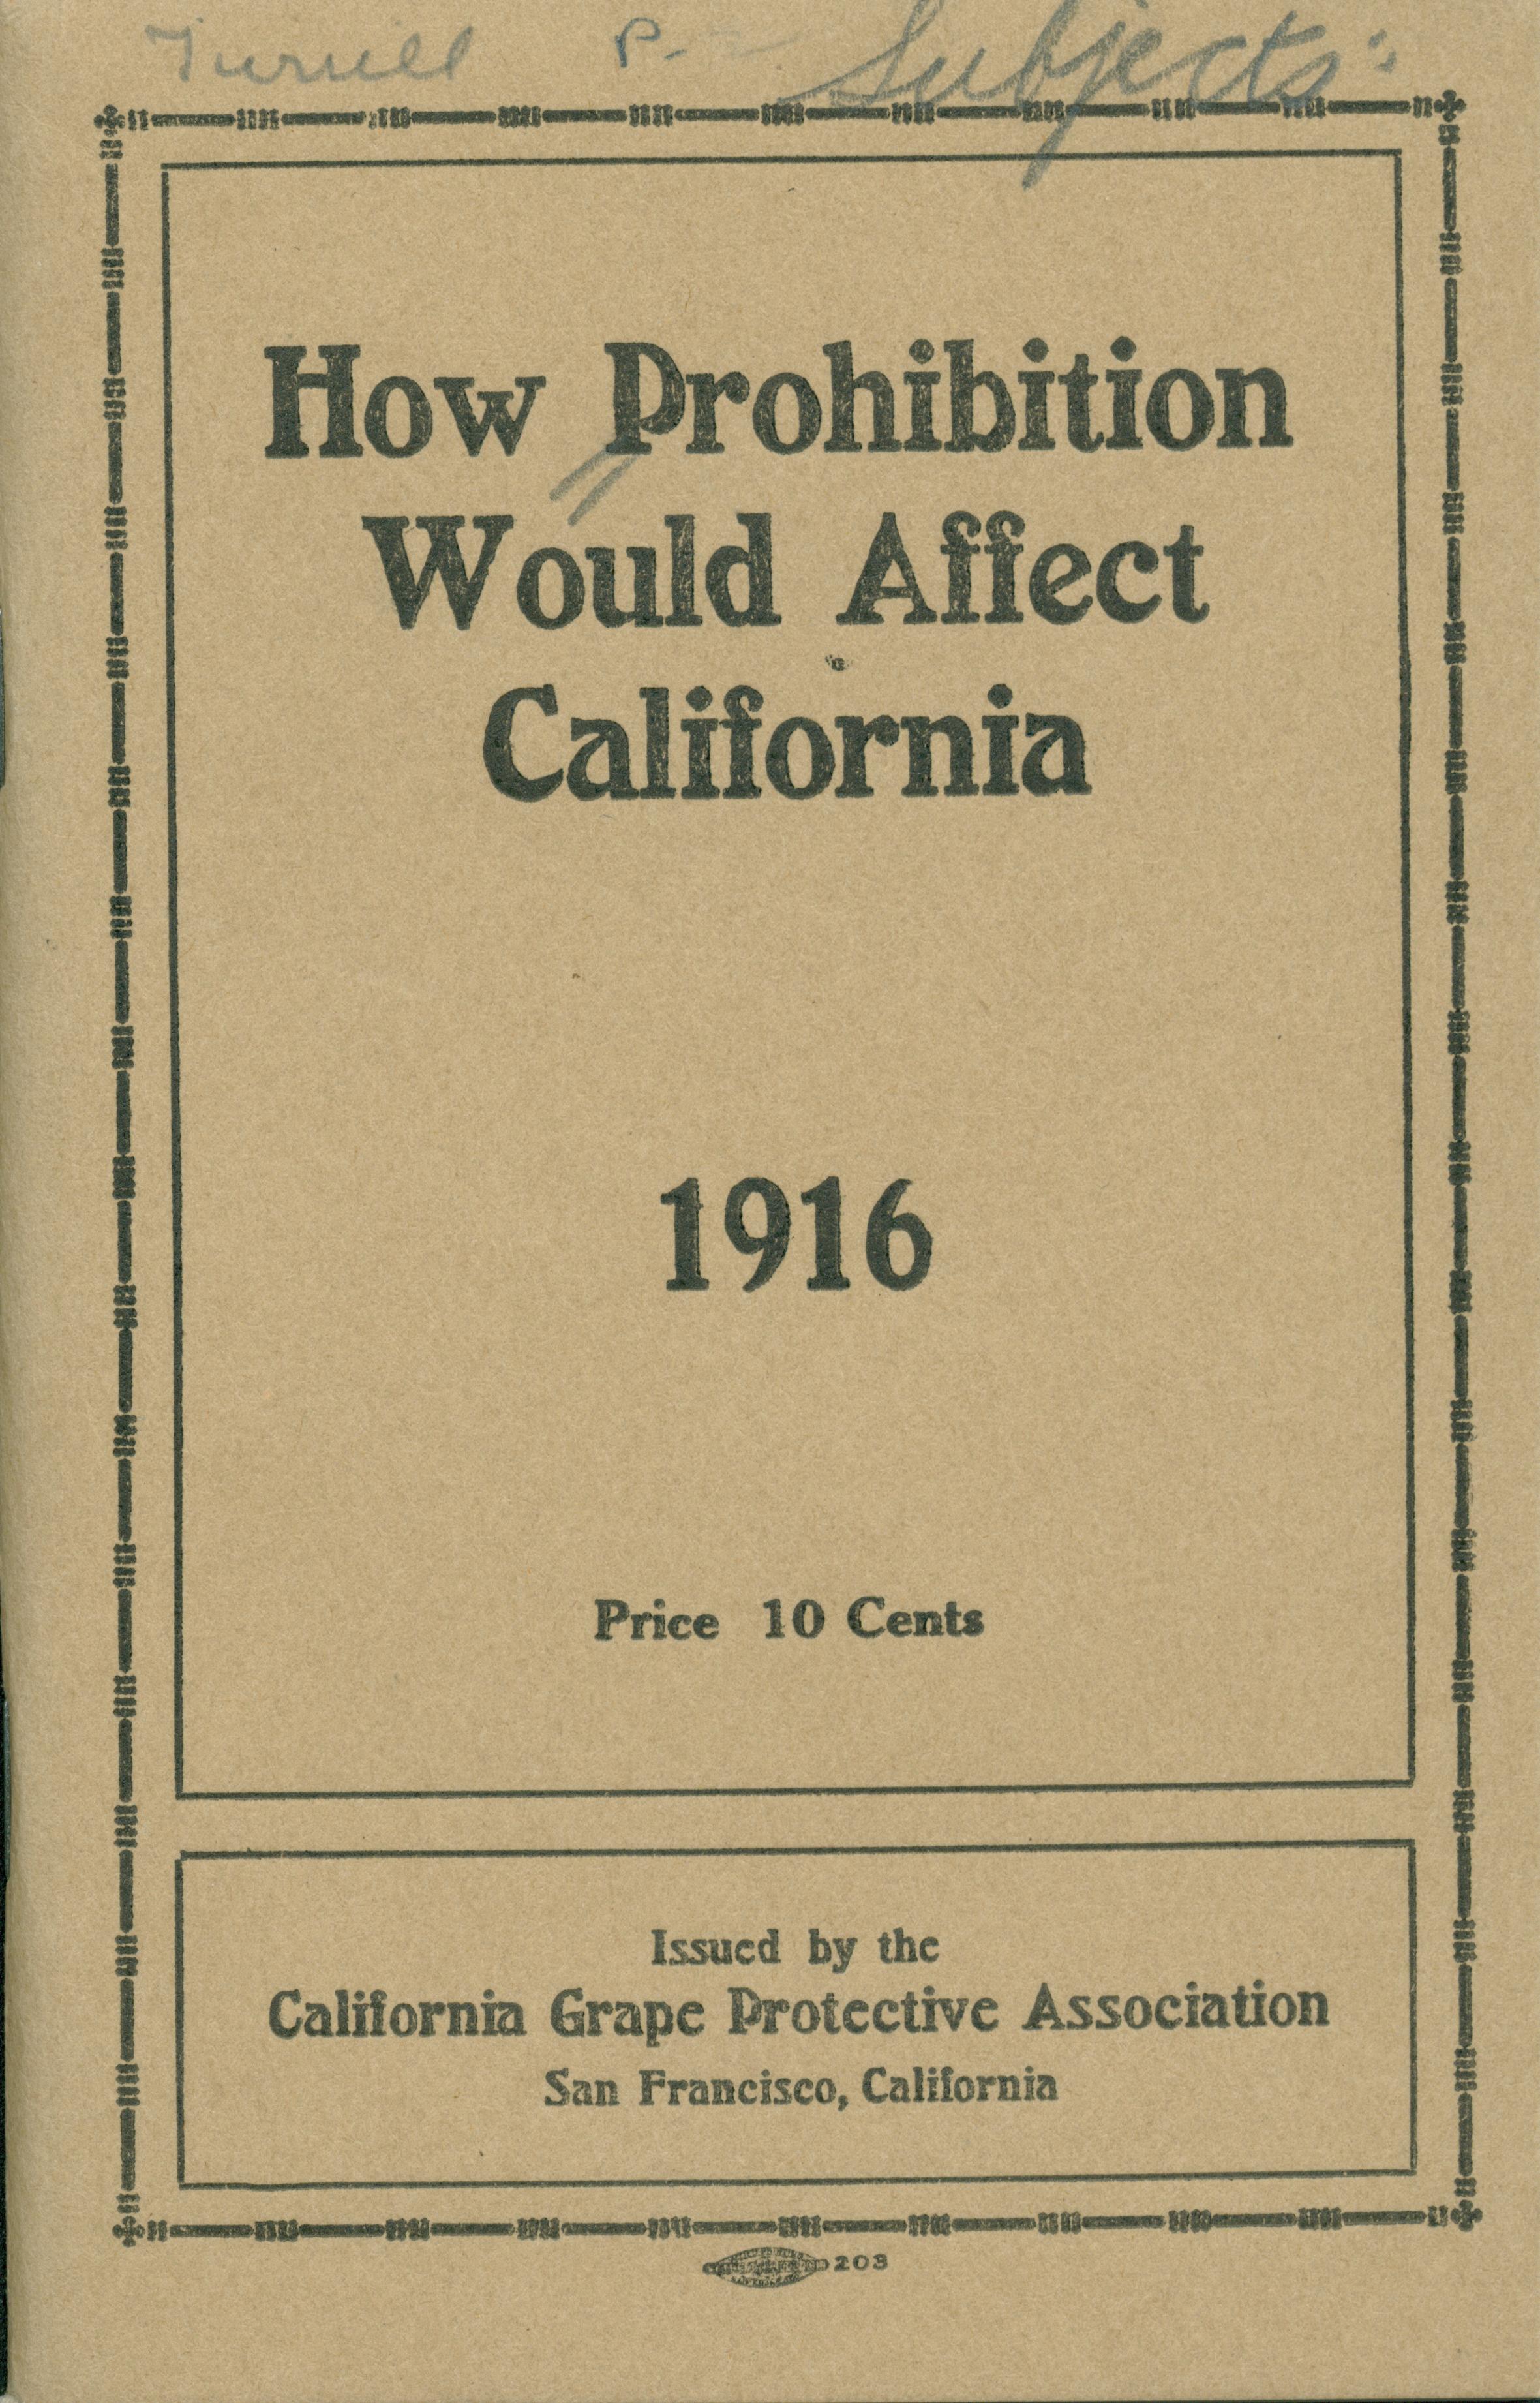 The scanned front page shows the title, issue date and author of this publication